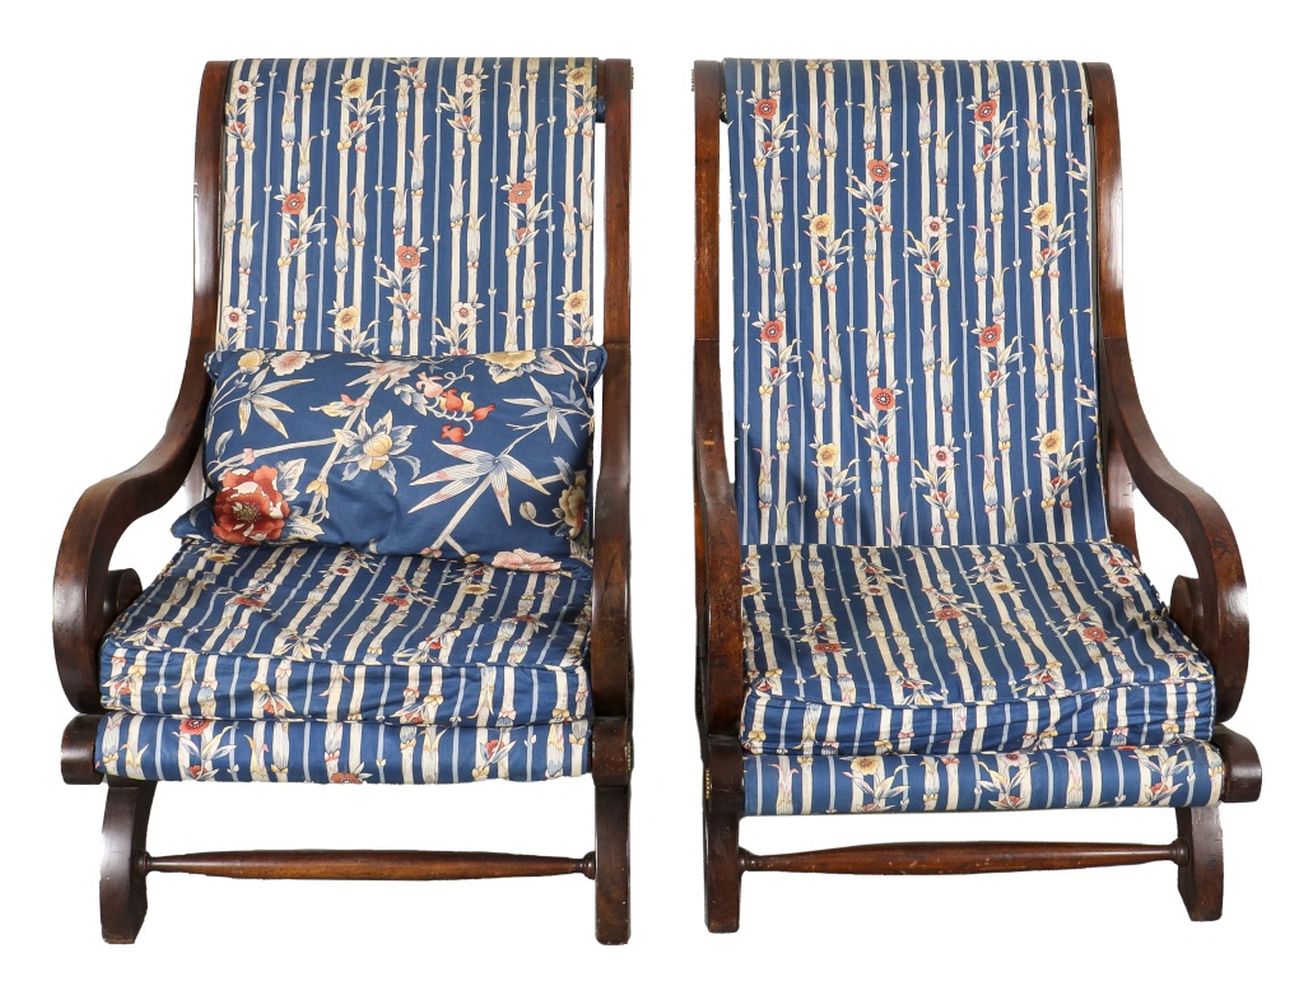 EMPIRE REVIVAL LOUNGE CHAIRS, 2 Empire